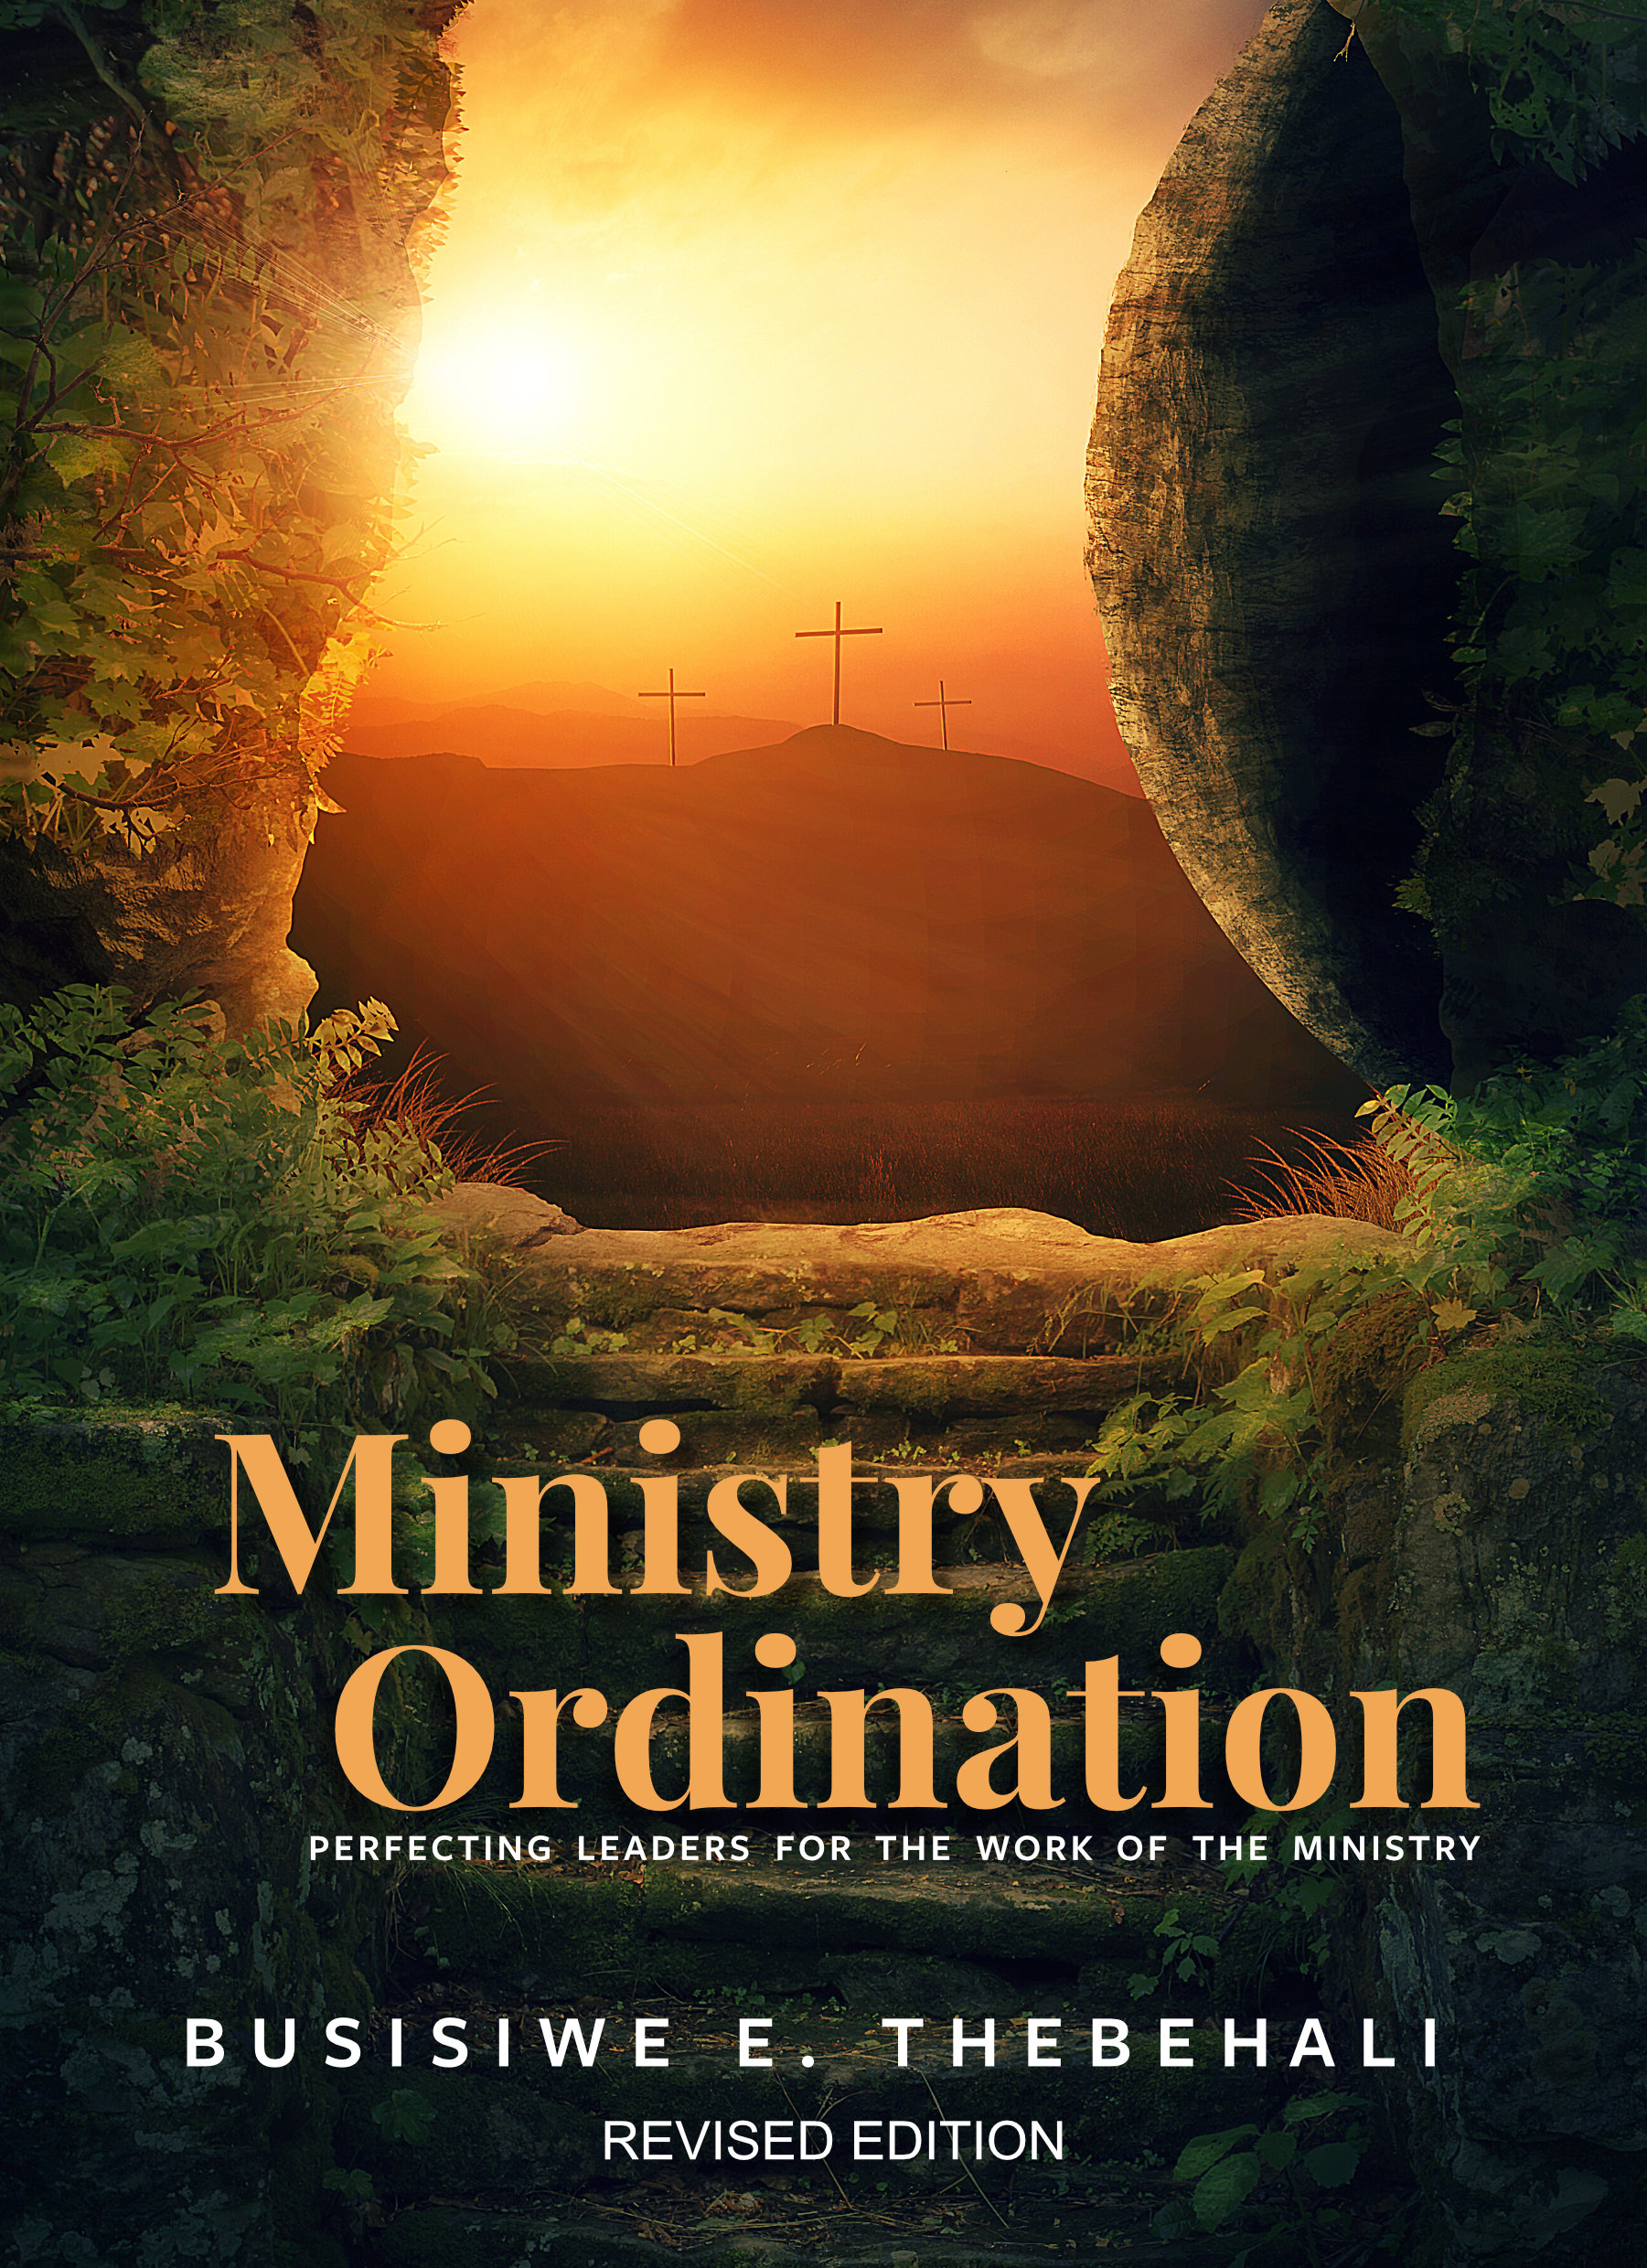 book-ebook-ministry-ordination--perfecting-leaders-for-the-work-of-the-ministry